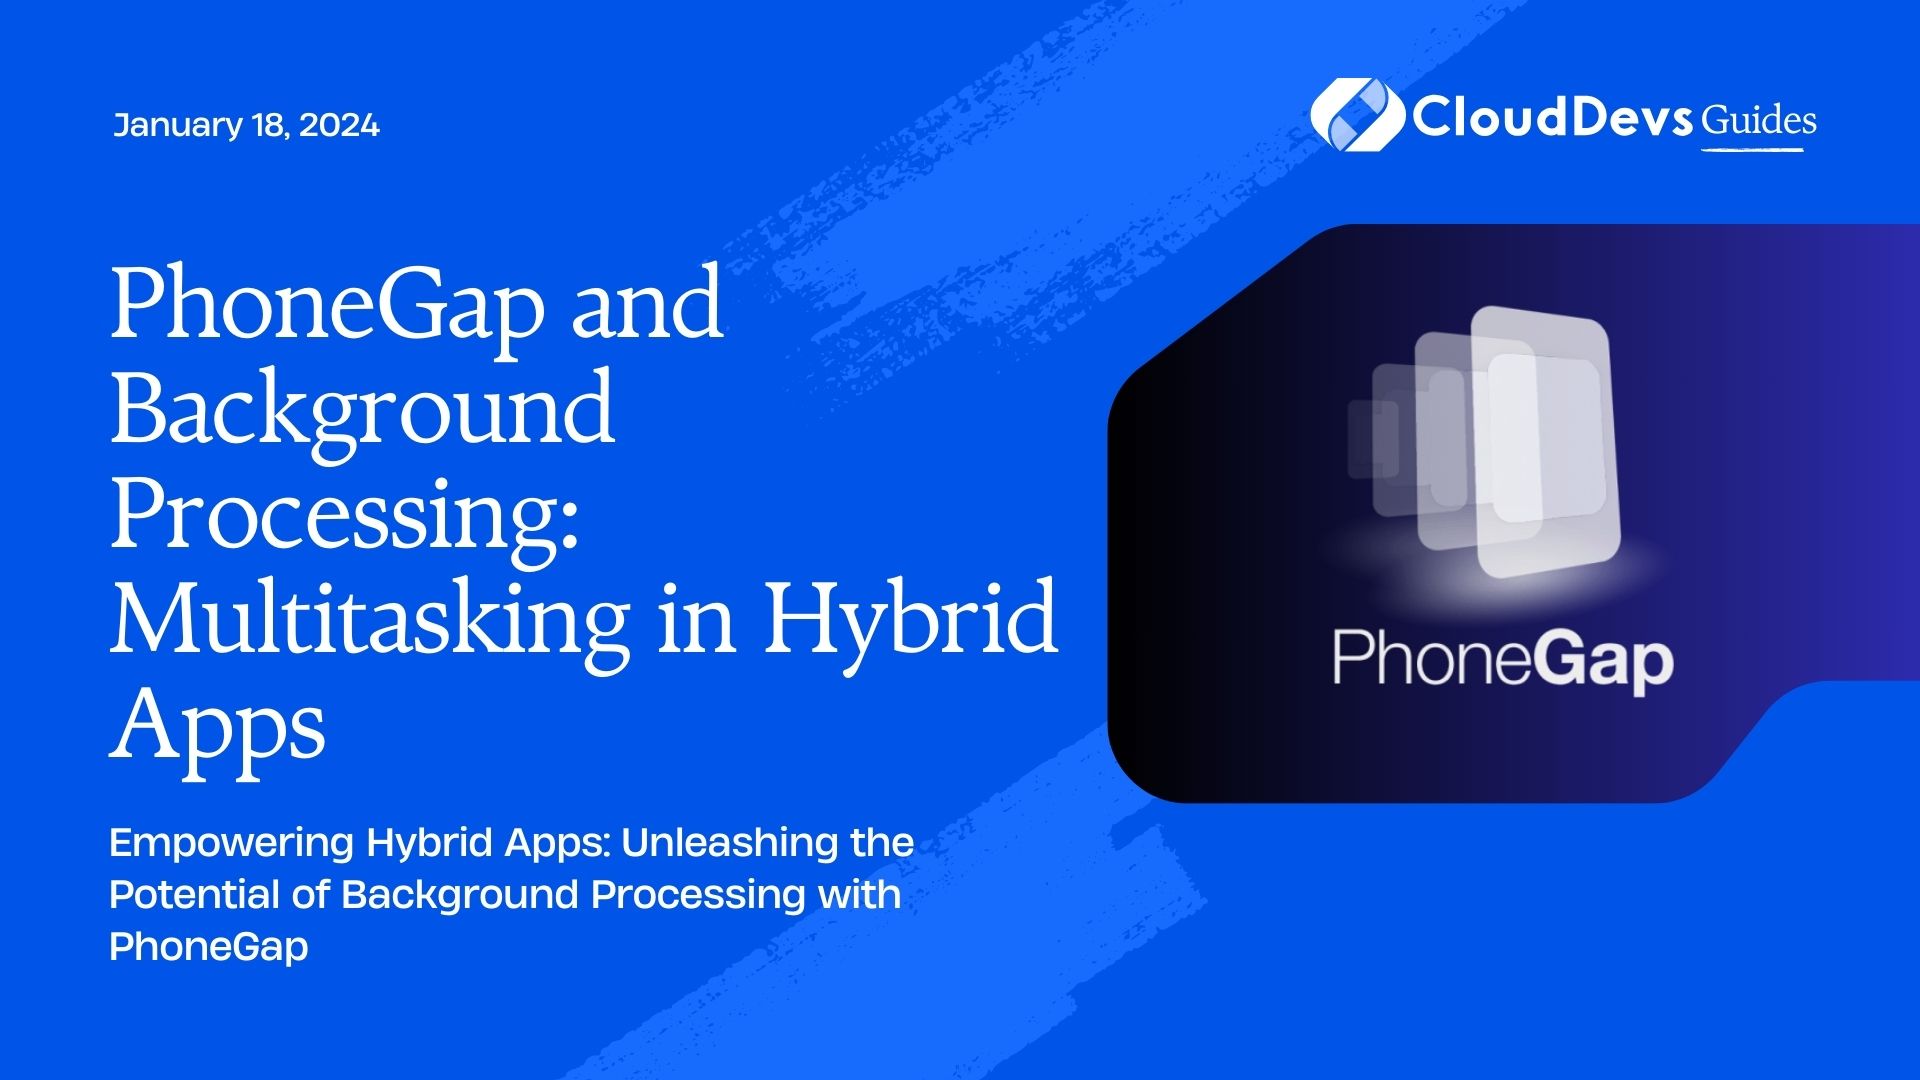 PhoneGap and Background Processing: Multitasking in Hybrid Apps